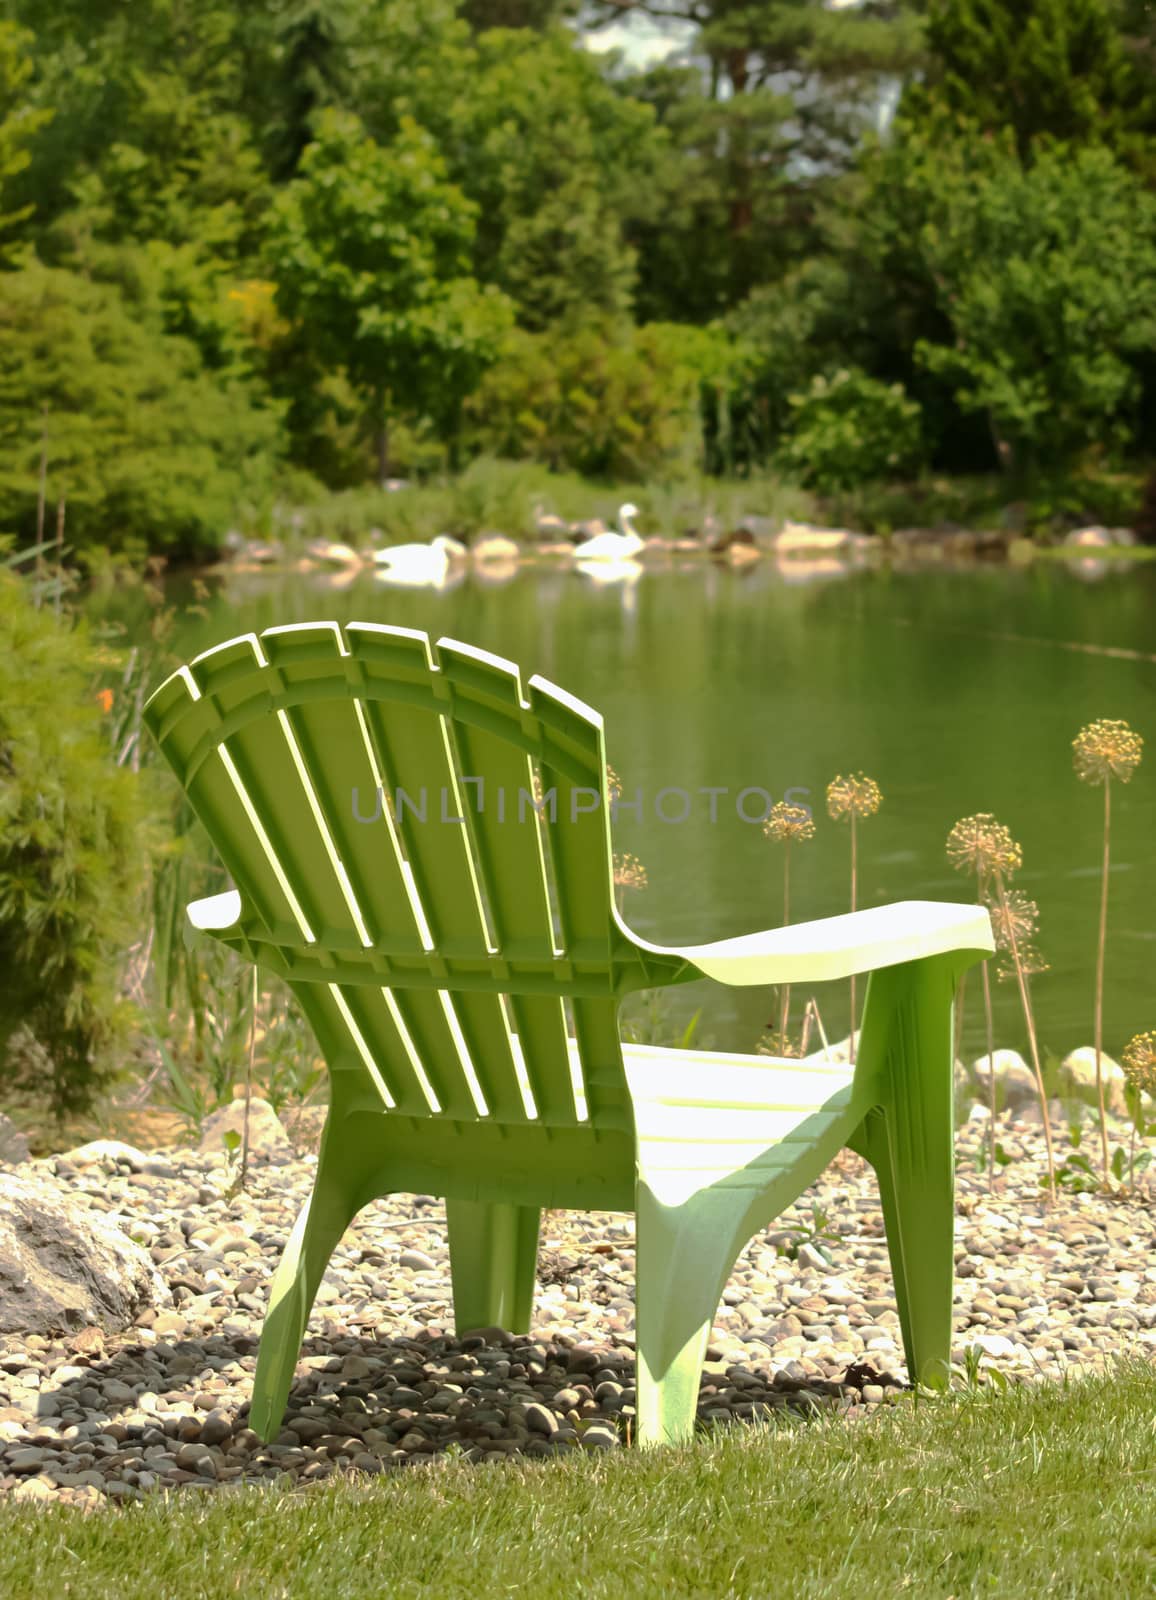 plastic adirondack style chair by a pond in the summer sun